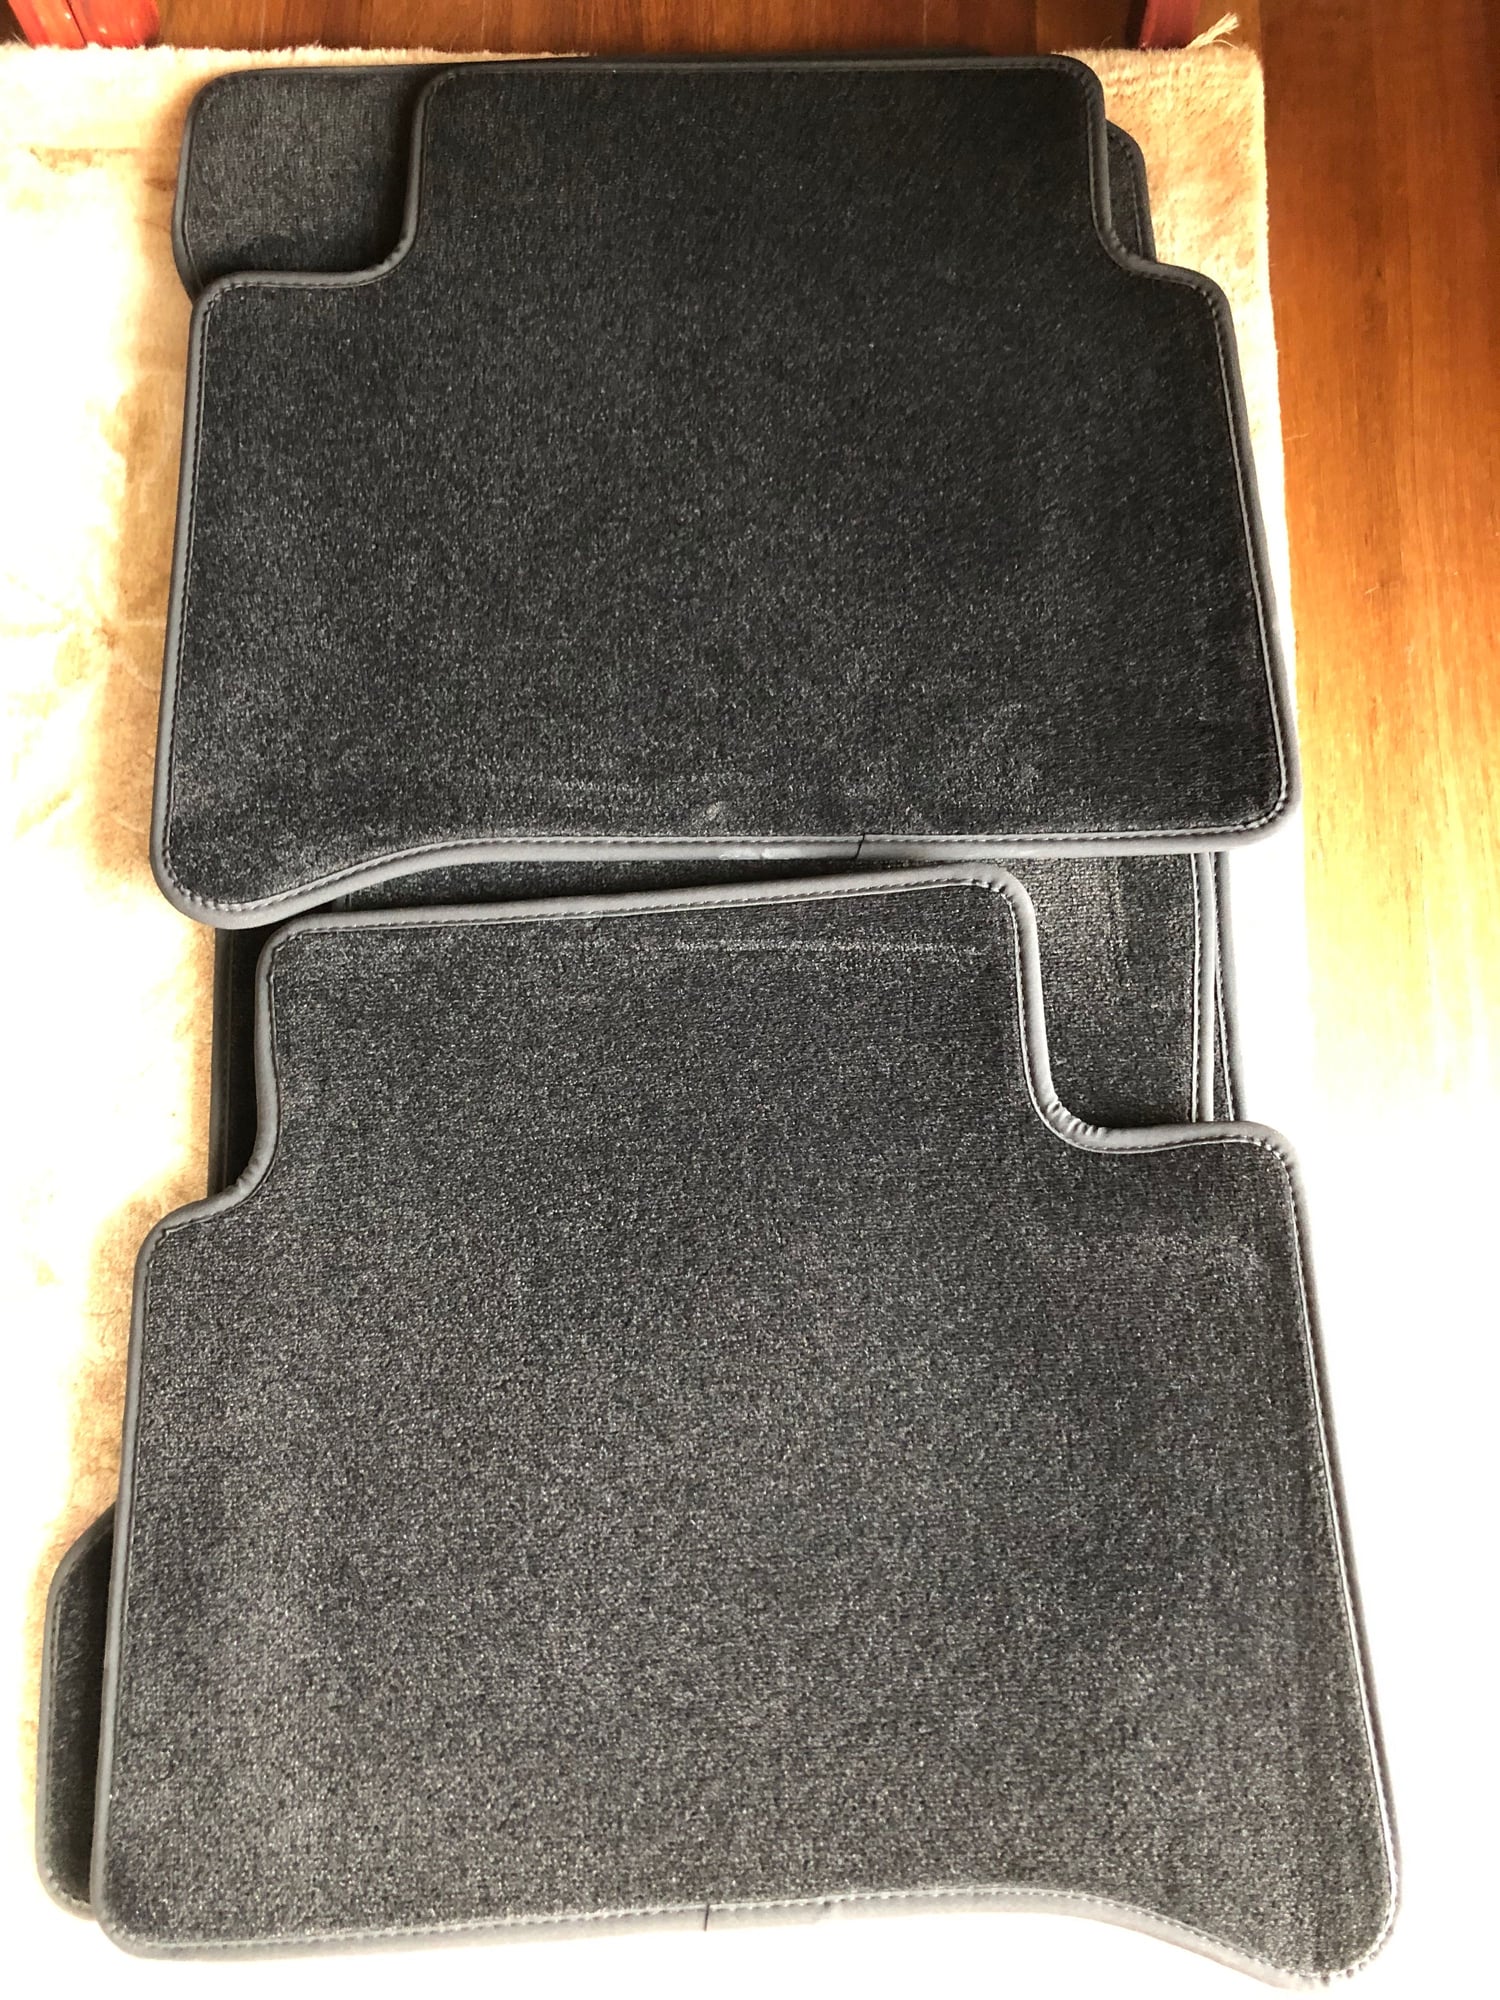 Interior/Upholstery - 2011 CLS550 New Factory Black floormats - NJ - New - -1 to 2025  All Models - Madison, NJ 07940, United States